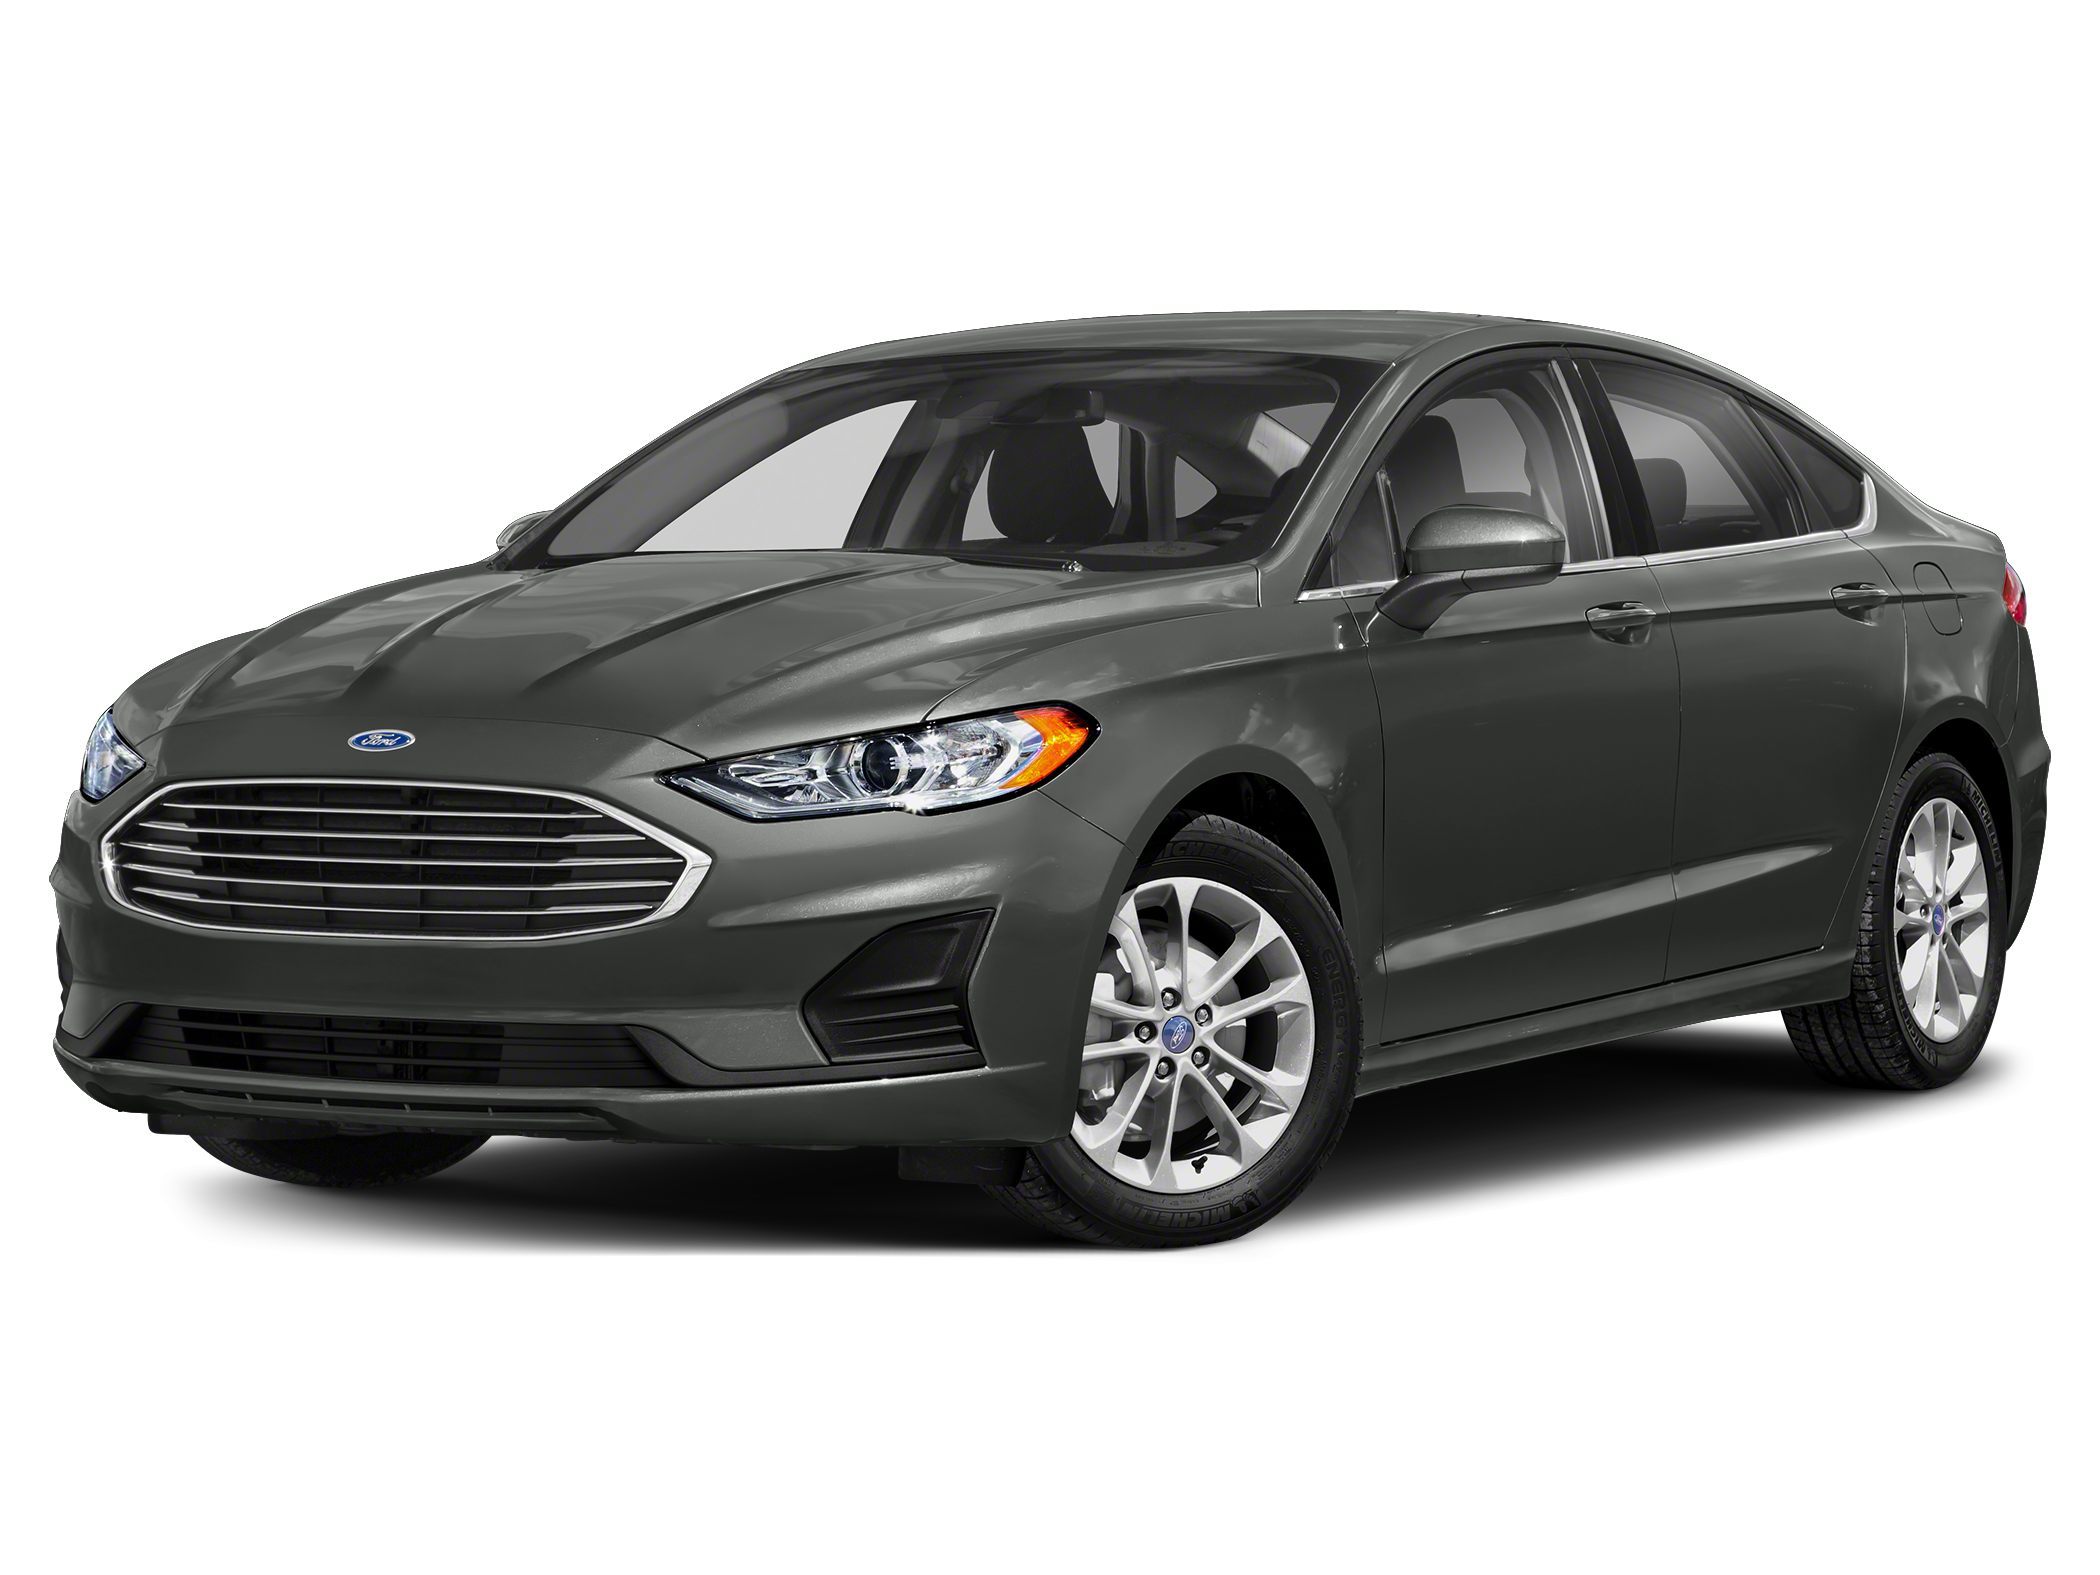 2019 Ford Fusion S Hero Image